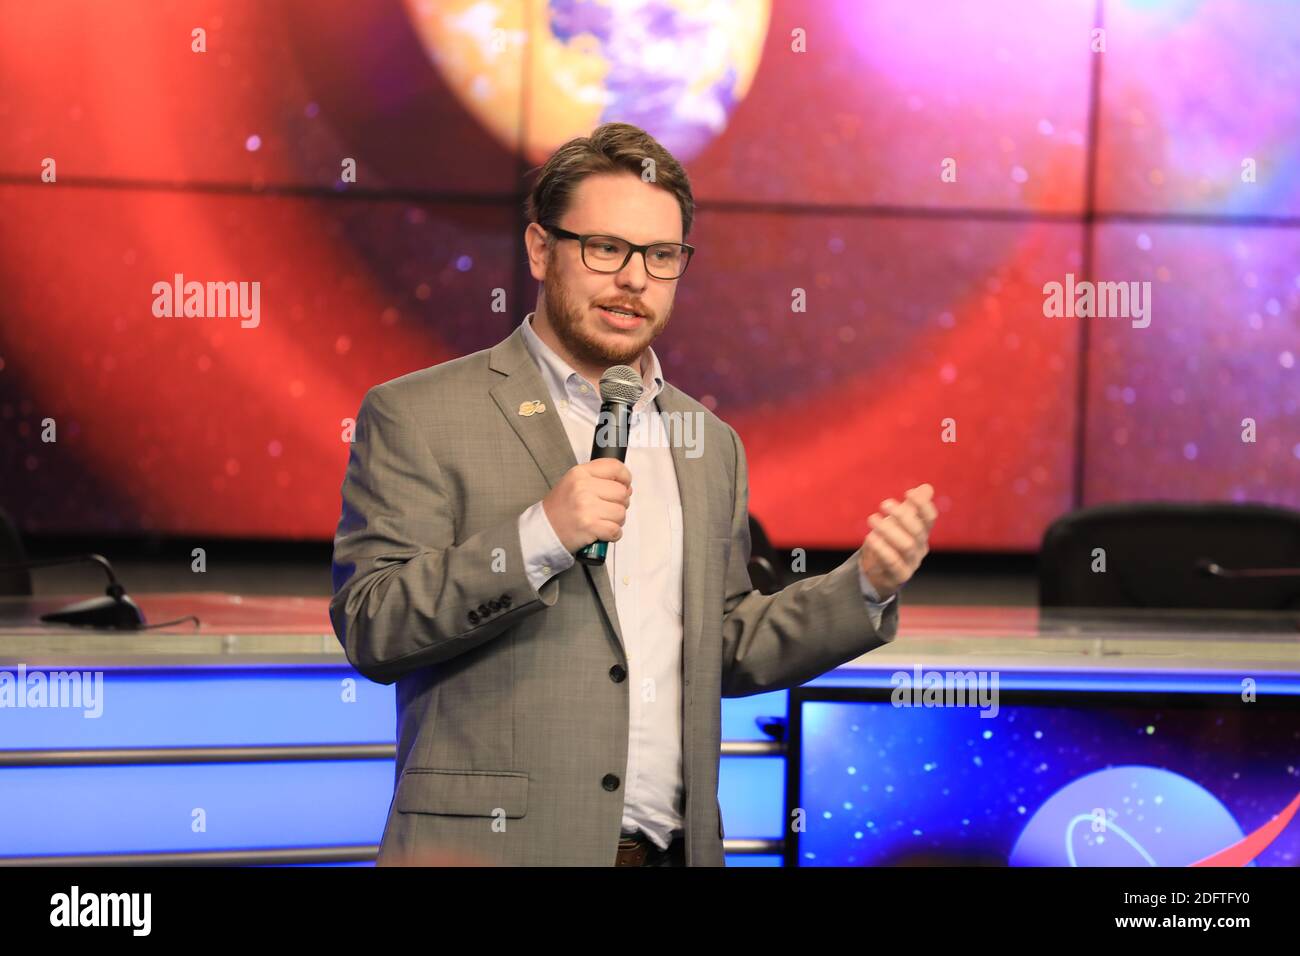 NASA Goddard Space Flight Center Scientist Tom Barclay speaks during the pre-launch mission briefing for the NASA Transitioning Exoplanet Survey Satellite (TESS) launch at the Kennedy Space Center Press Site Auditorium April 15, 2018 in Cape Canaveral, Florida. Stock Photo